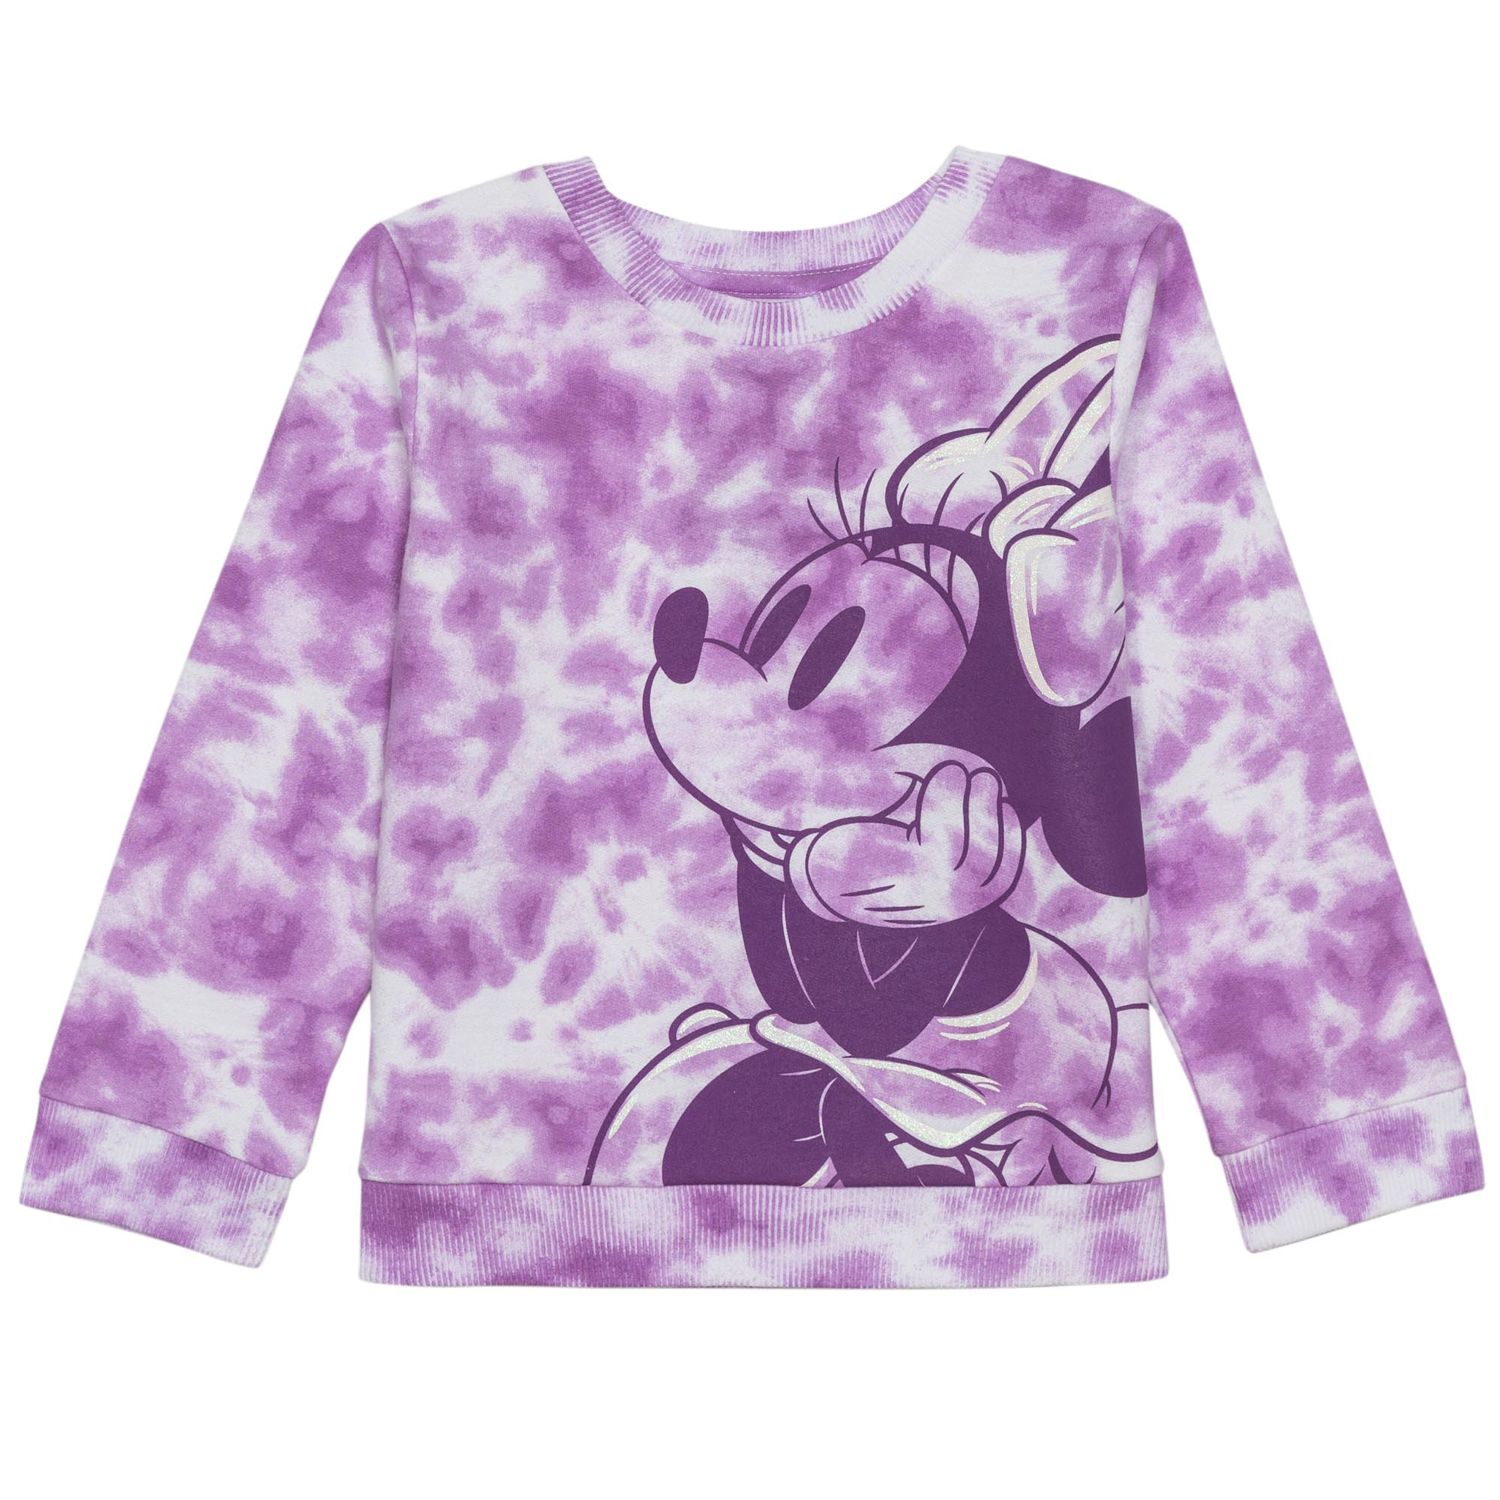 Image for Disney/Jumping Beans Disney's Minnie Mouse Toddler Girl Tie-Dye Fleece by Jumping Beans® at Kohl's.